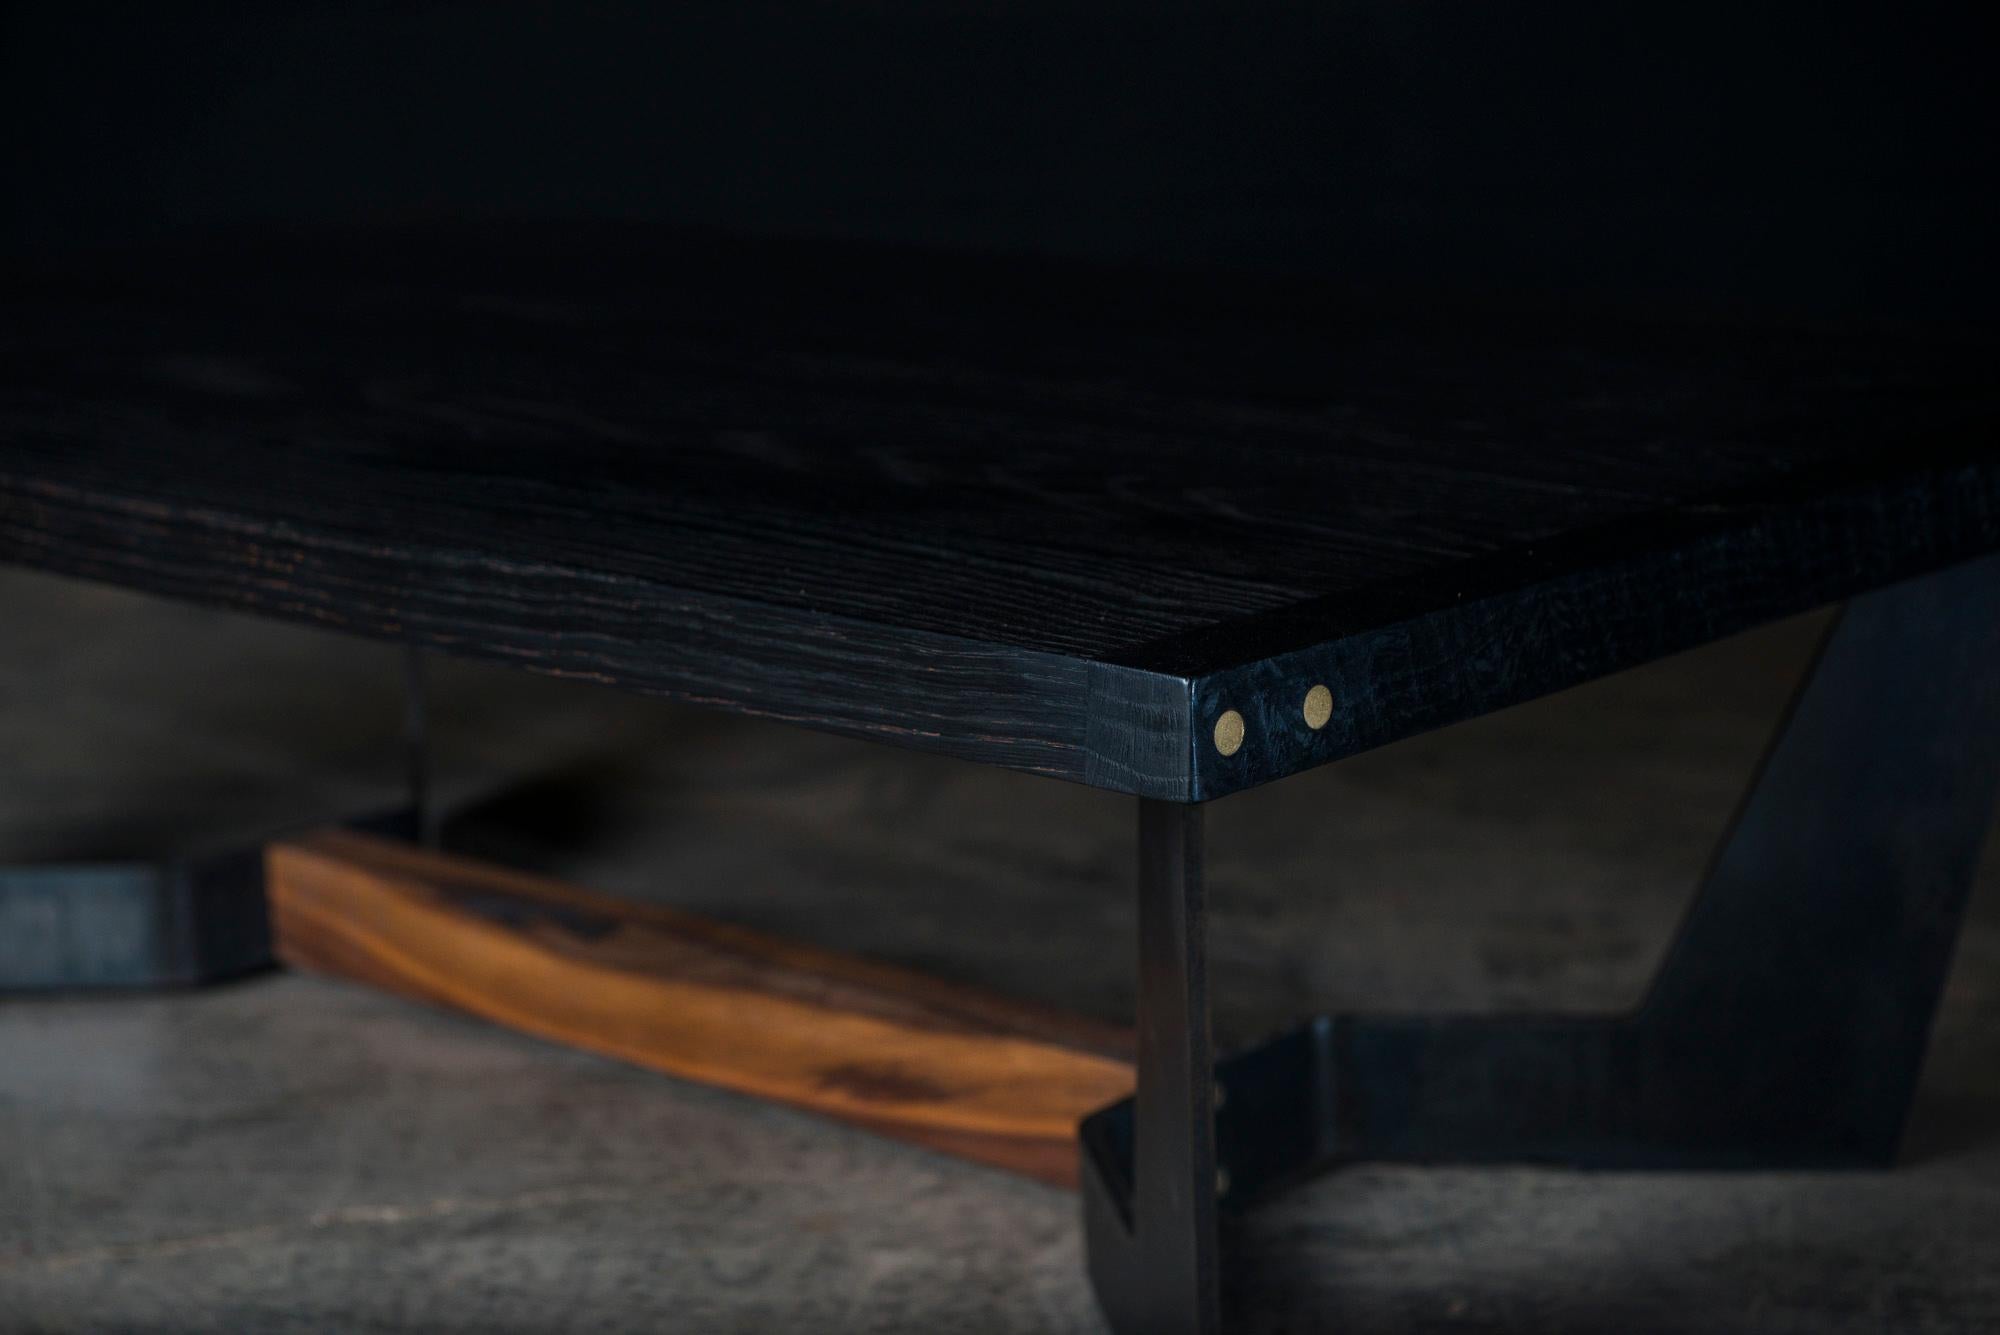 The Frankin center table is handmade from a thick solid wood surface & featured subtitle hand polished brass details at the end. It has a hand rubbed natural oil and wax finish that enhance the real beauty of the wood and give a natural warm touch.